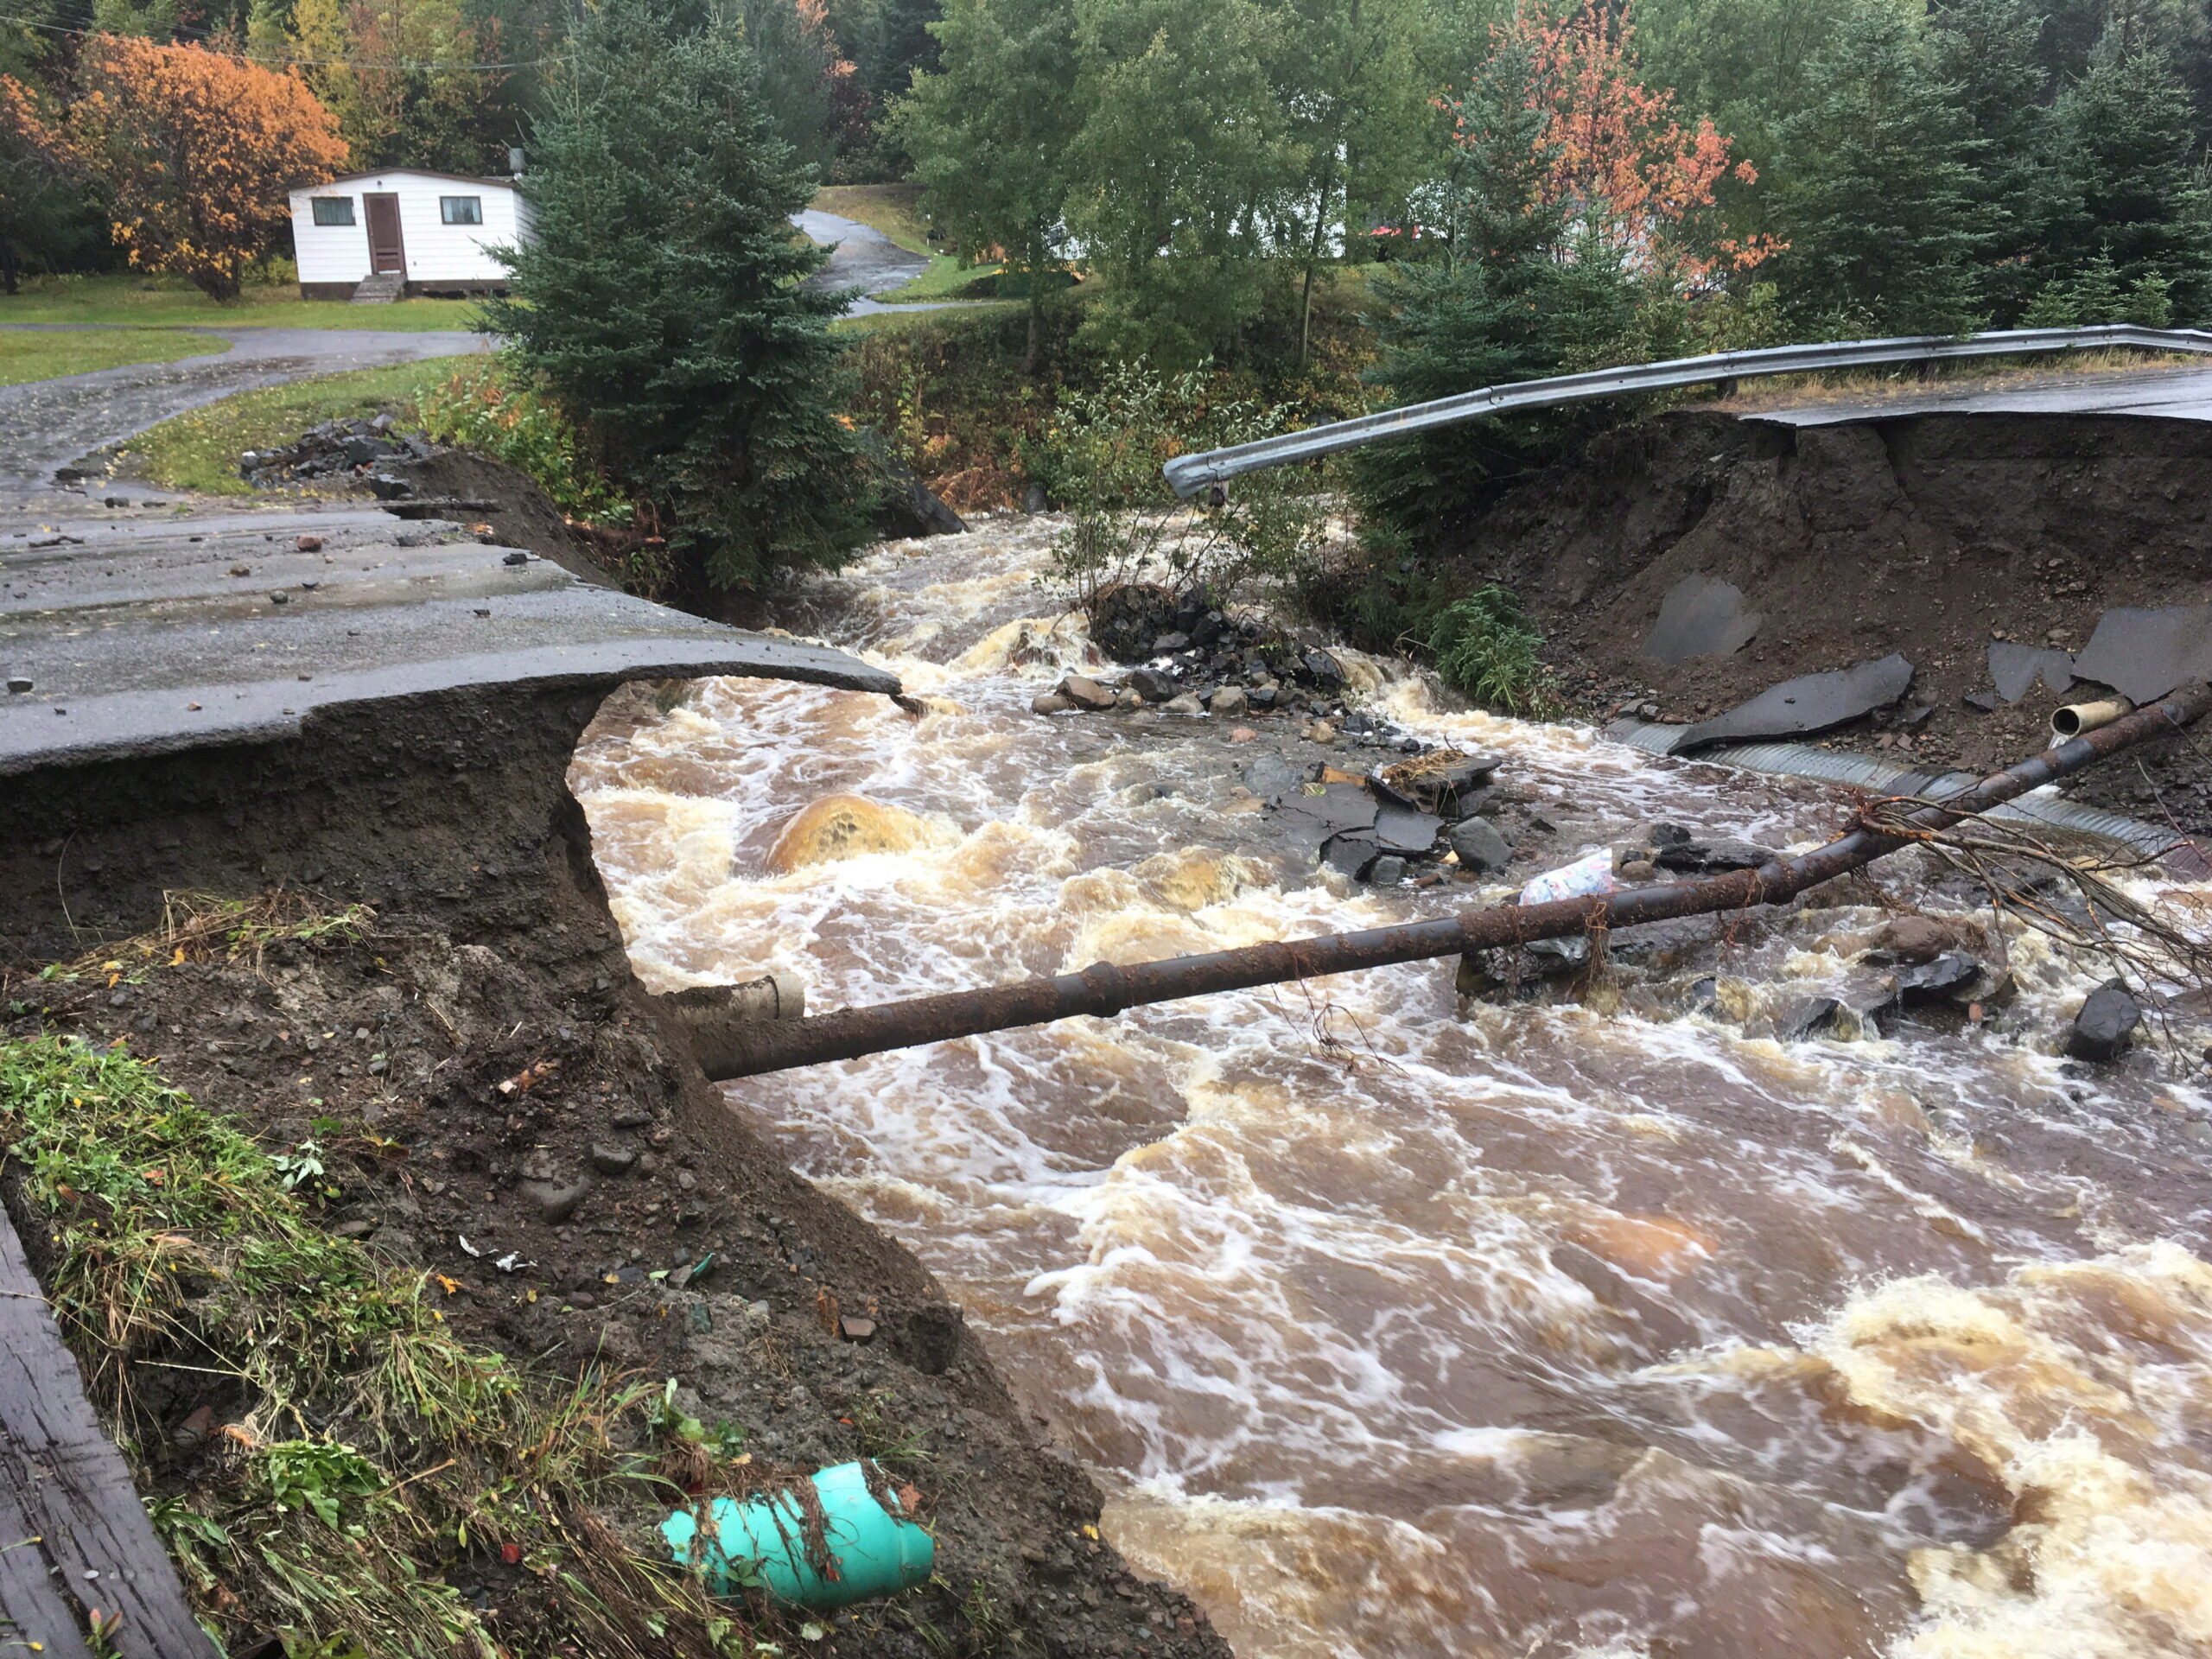 Water rushes under a section of damaged road in Norris Arm, Newfoundland after a hurricane struck in 2016